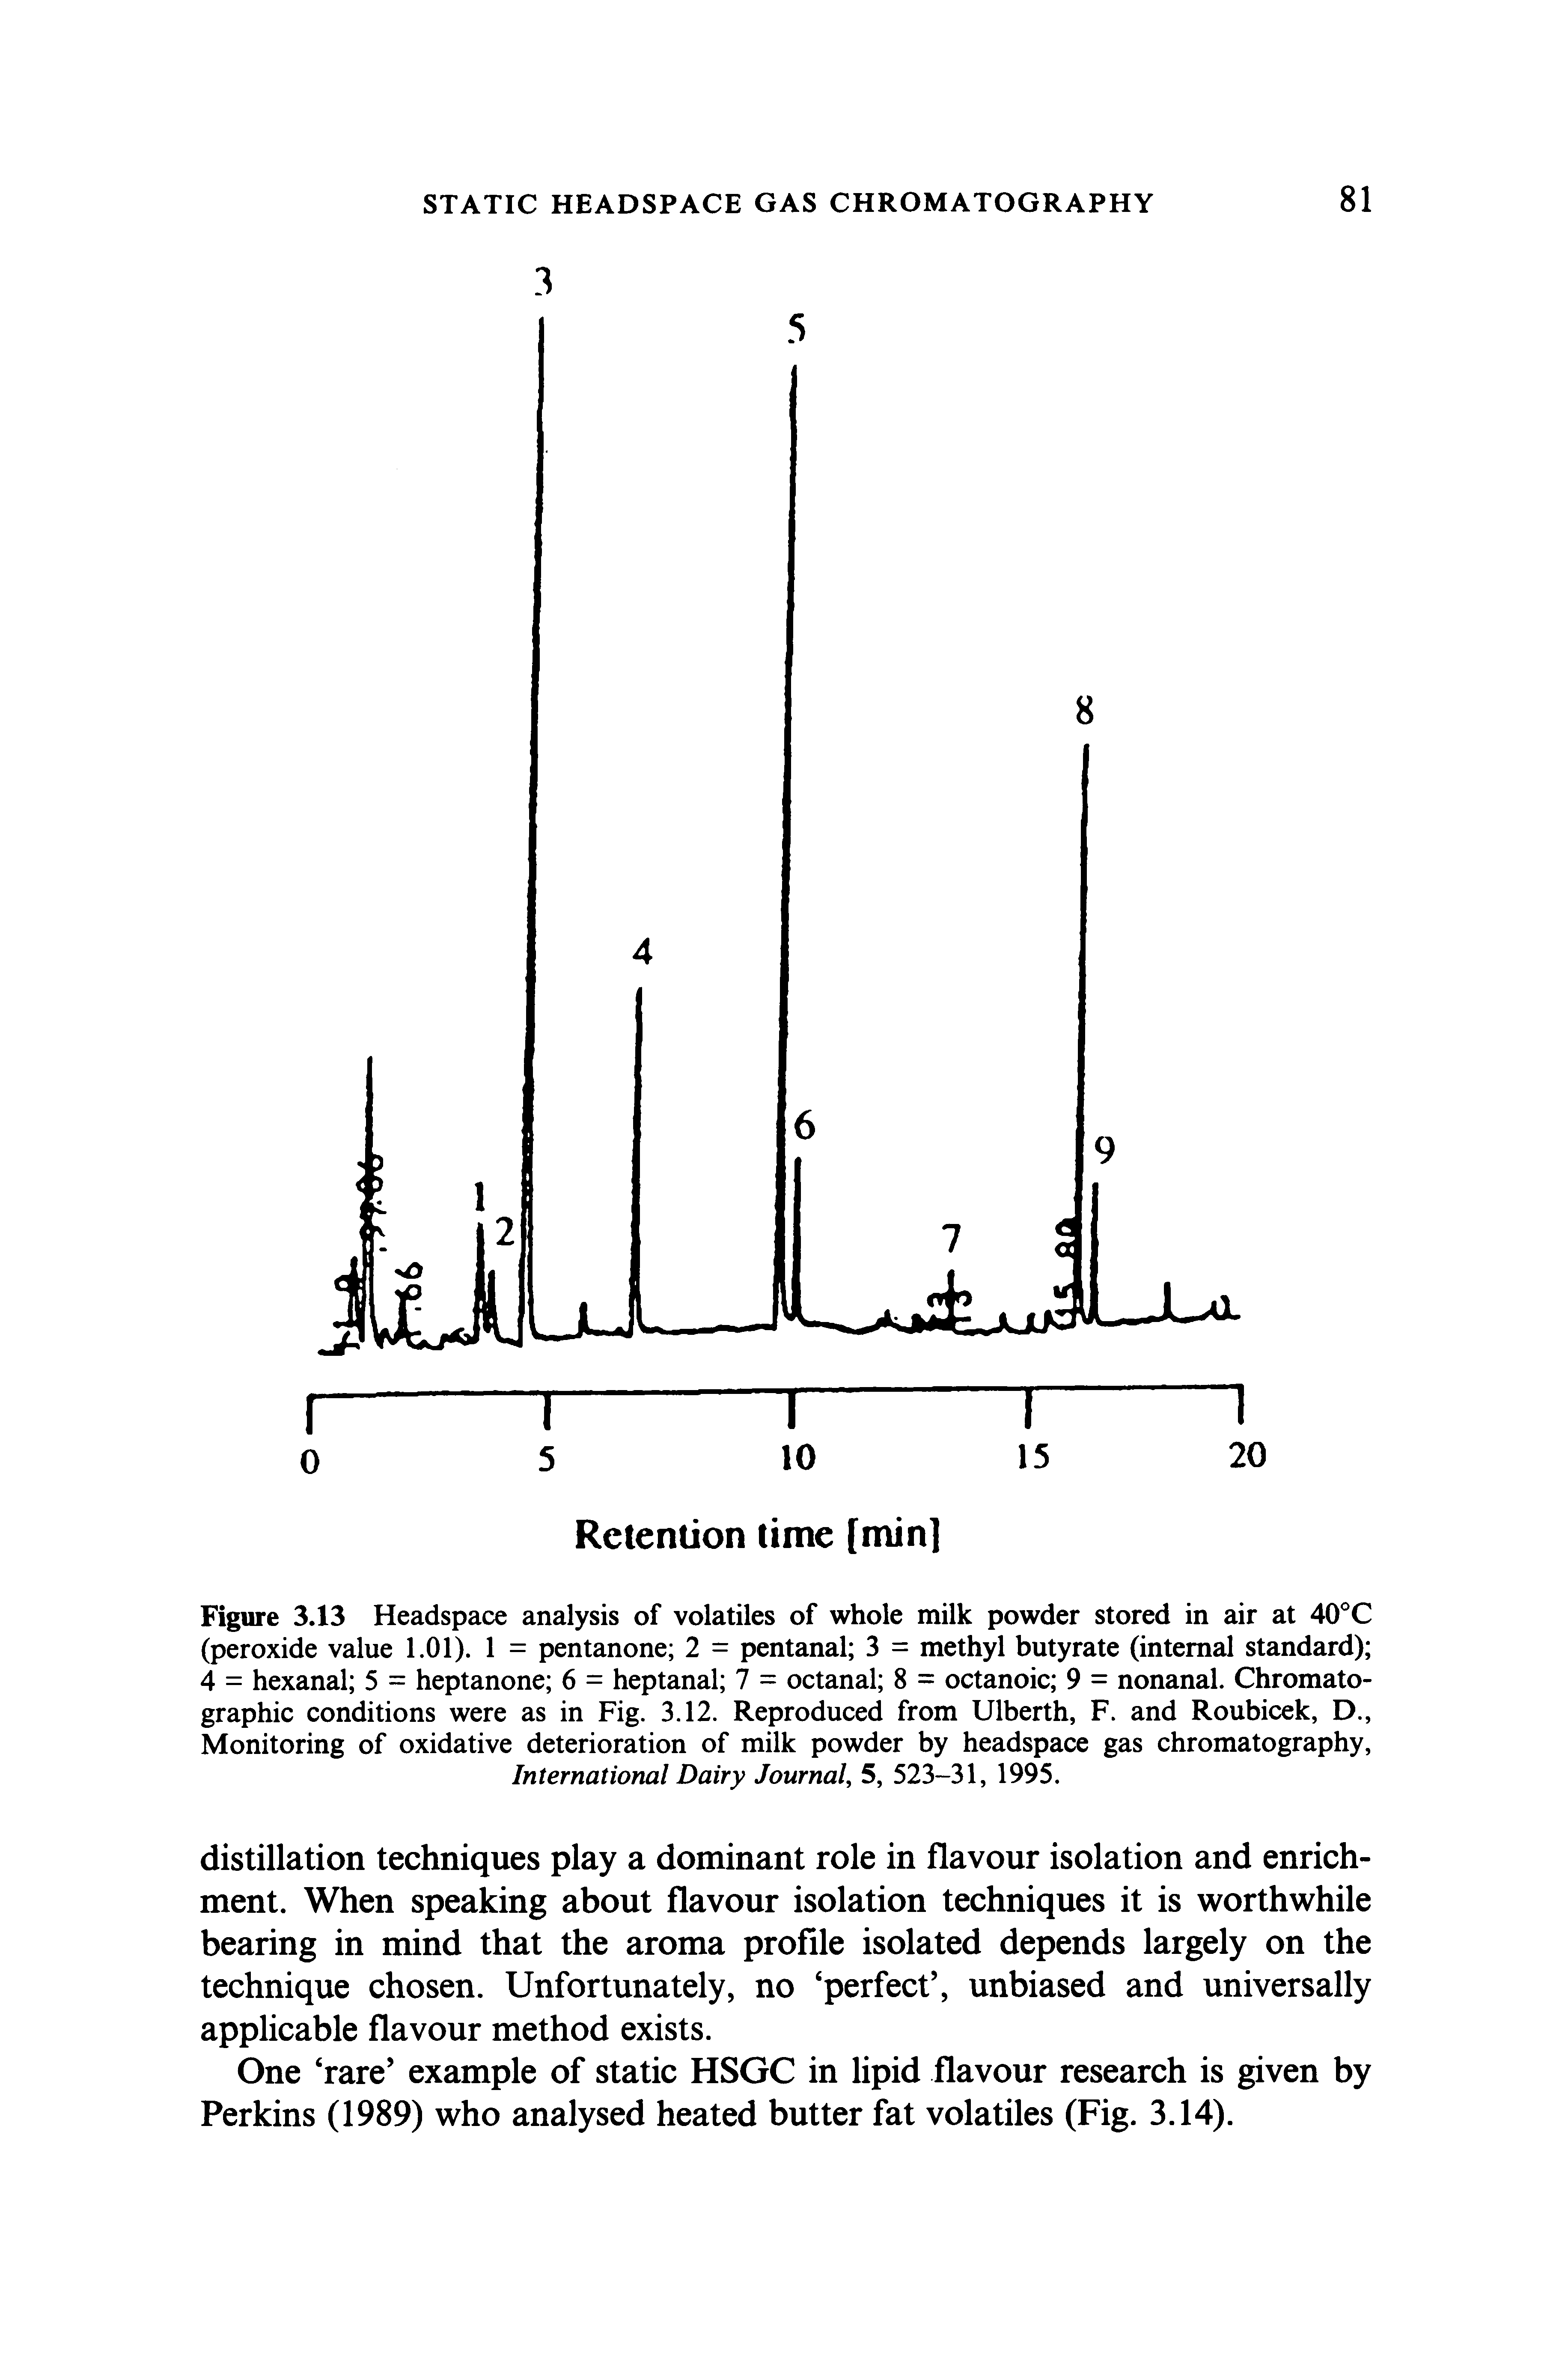 Figure 3.13 Headspace analysis of volatiles of whole milk powder stored in air at 40 C (peroxide value 1.01). 1 = pentanone 2 = pentanal 3 = methyl butyrate (internal standard) 4 = hexanal 5 = heptanone 6 = heptanal 7 = octanal 8 = octanoic 9 = nonanal. Chromatographic conditions were as in Fig. 3.12. Reproduced from Ulberth, F. and Roubicek, D., Monitoring of oxidative deterioration of milk powder by headspace gas chromatography. International Dairy Journal, 5, 523-31, 1995.